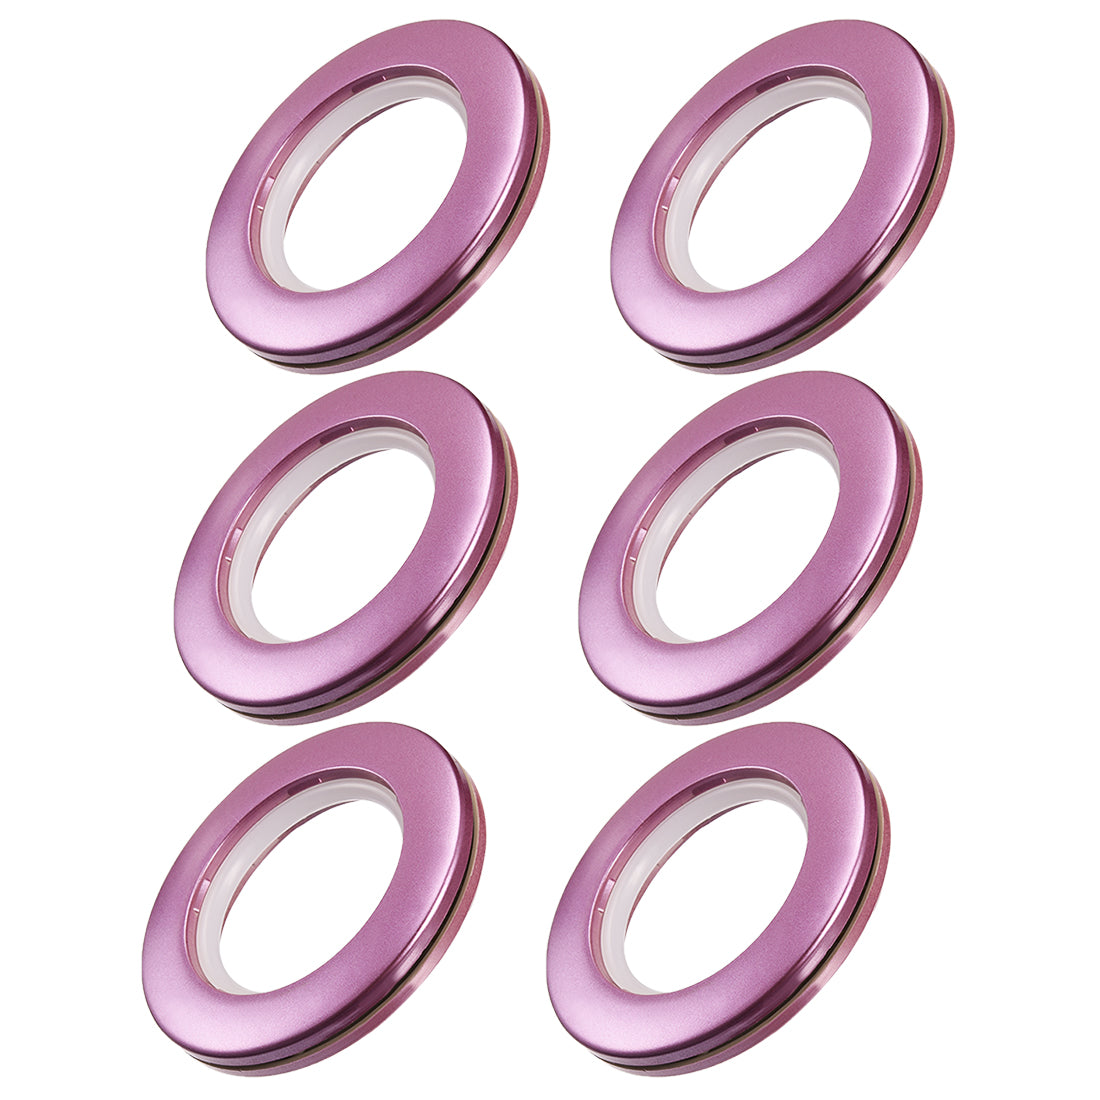 uxcell Uxcell Curtain Grommets Plastic Drapery Eyelet Rings for Window Curtain Rods